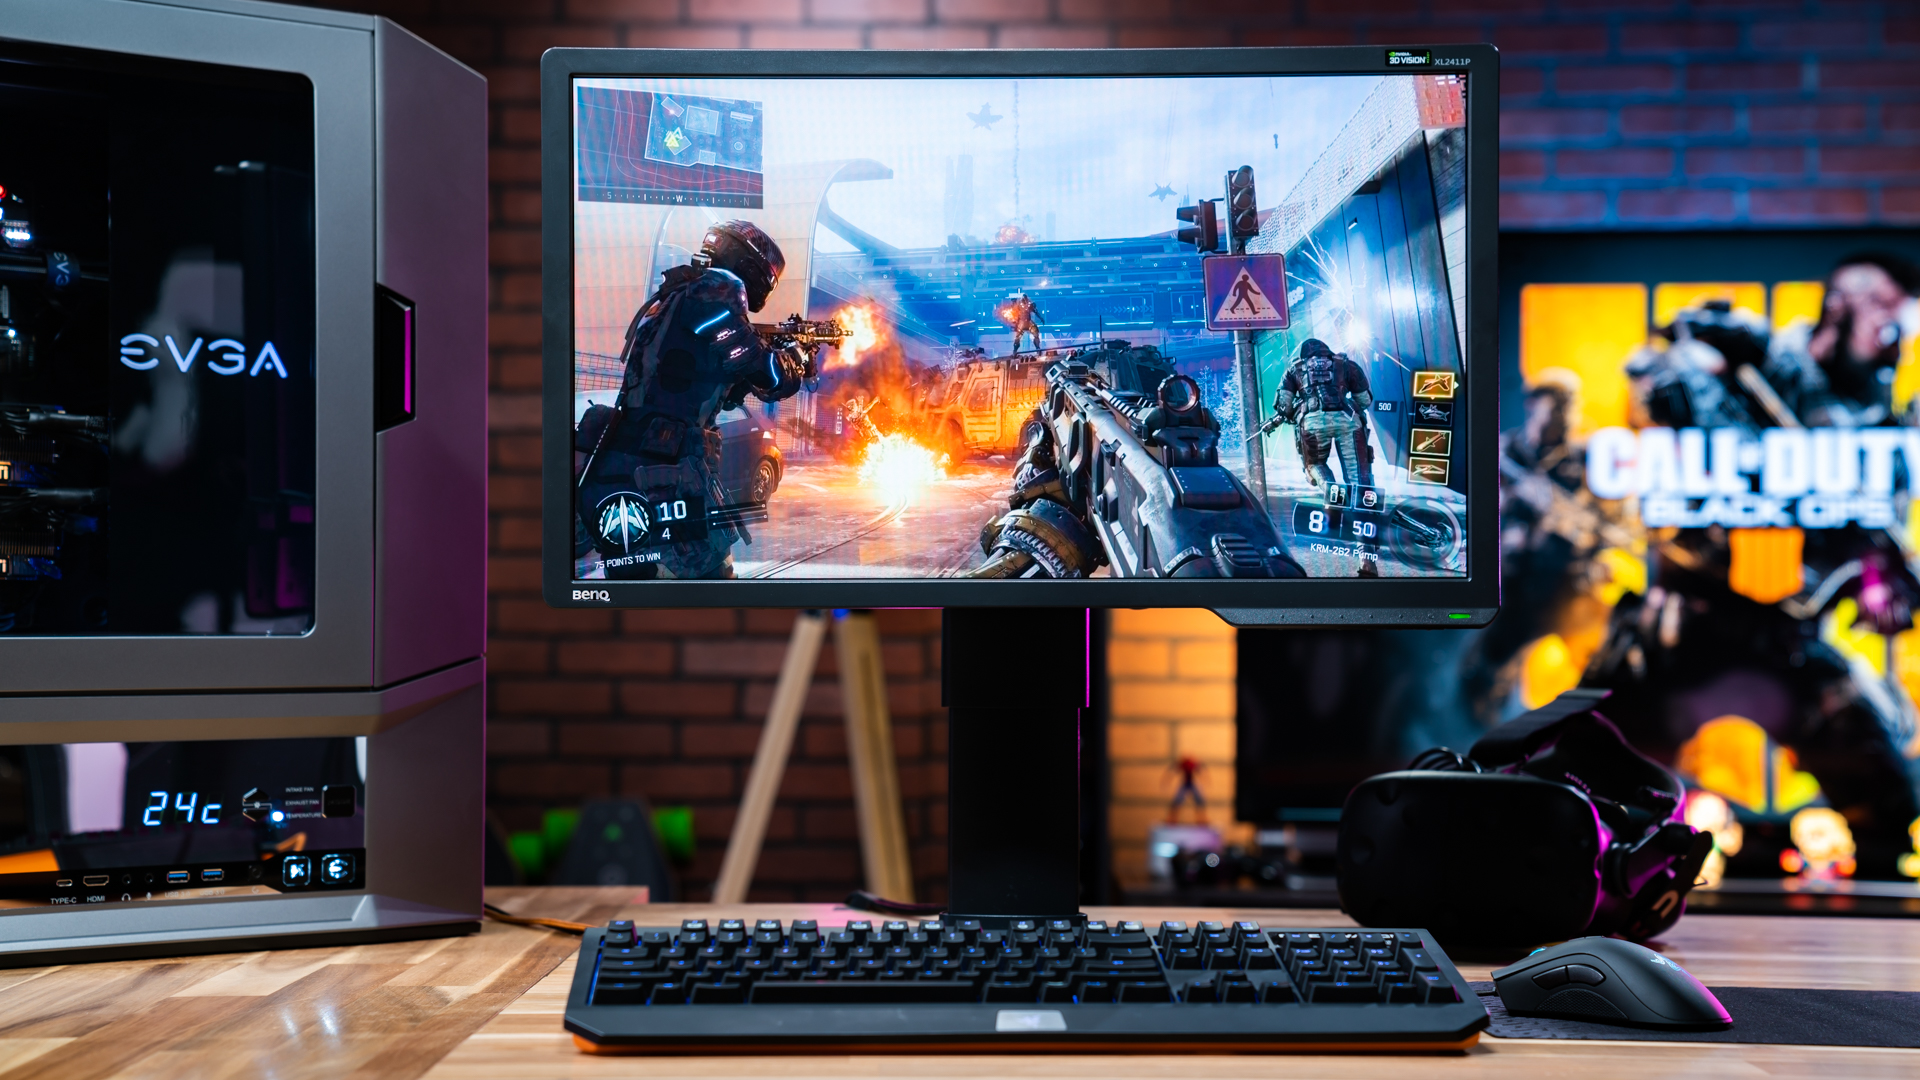 BenQ's XL2411P Monitor Offers High Performance with No Frills